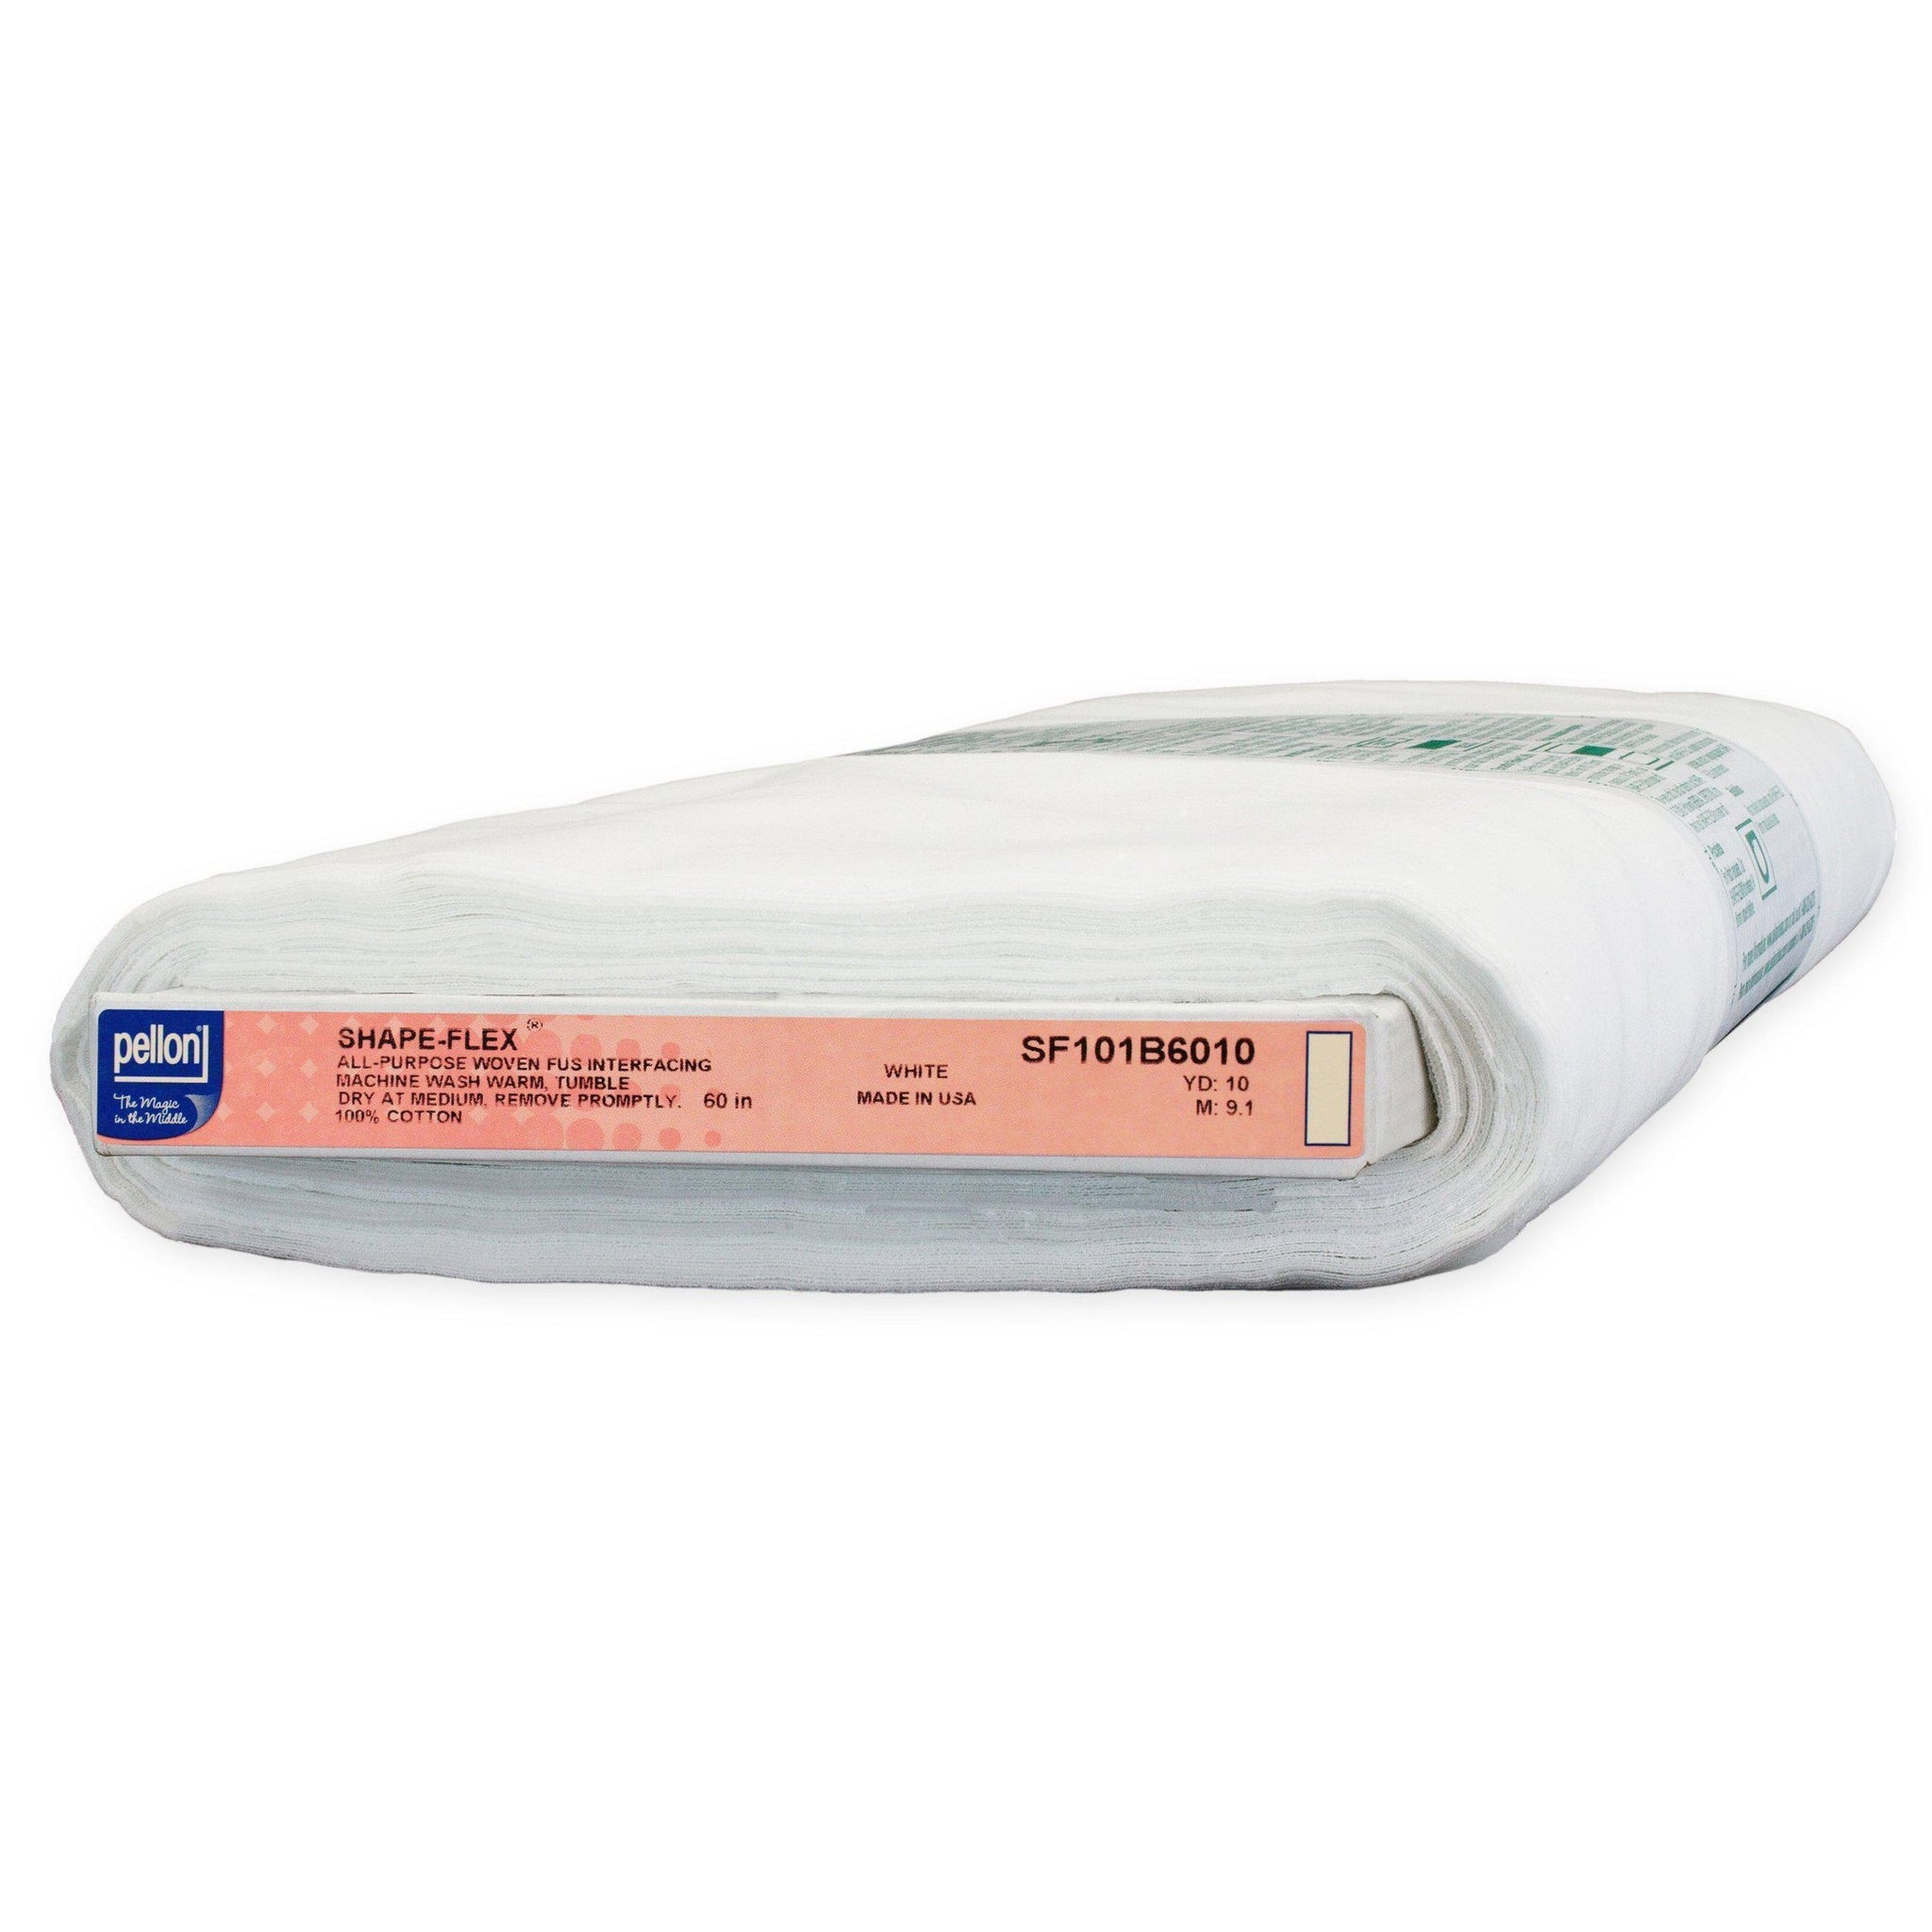 Shape-Flex Fusible Interfacing - SF101 – gather here online